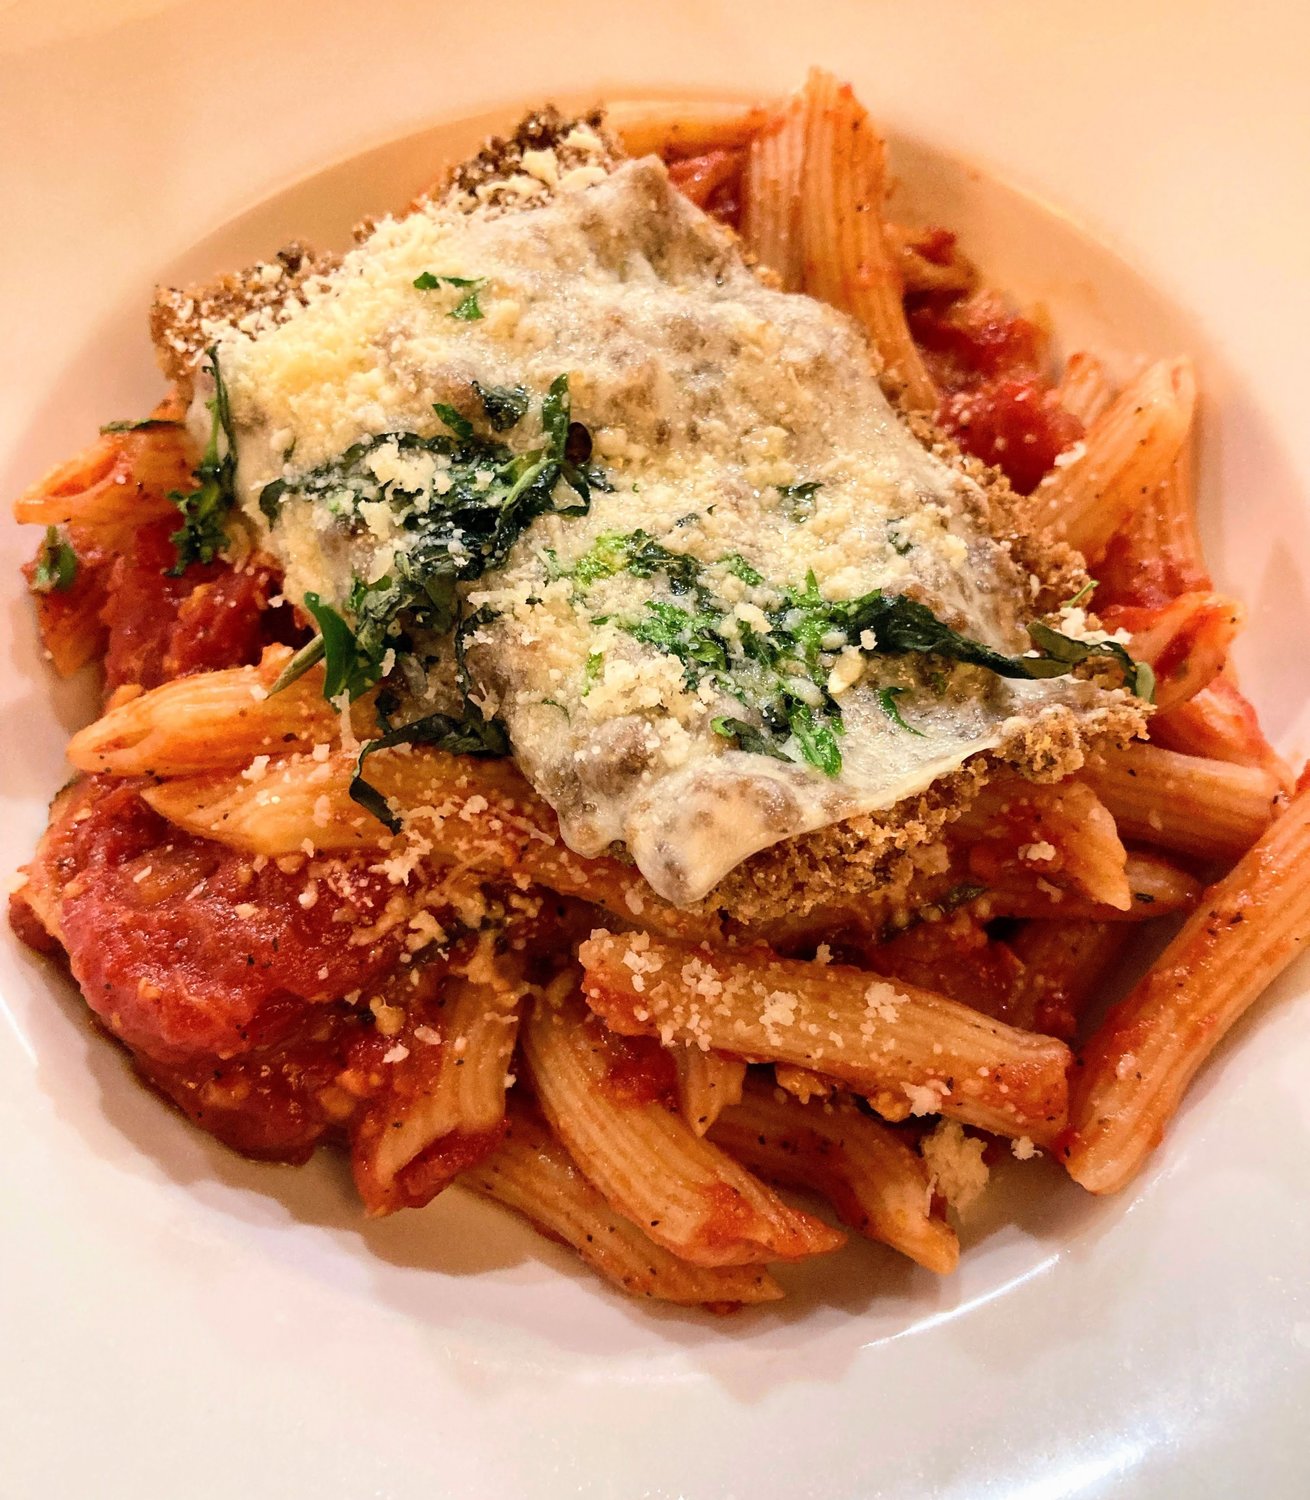 Tannin’s crispy-yet-juicy chicken Parmesan sits atop a bed of penne dressed with bright, fresh-tasting marinara sauce, all topped with fragrant basil.